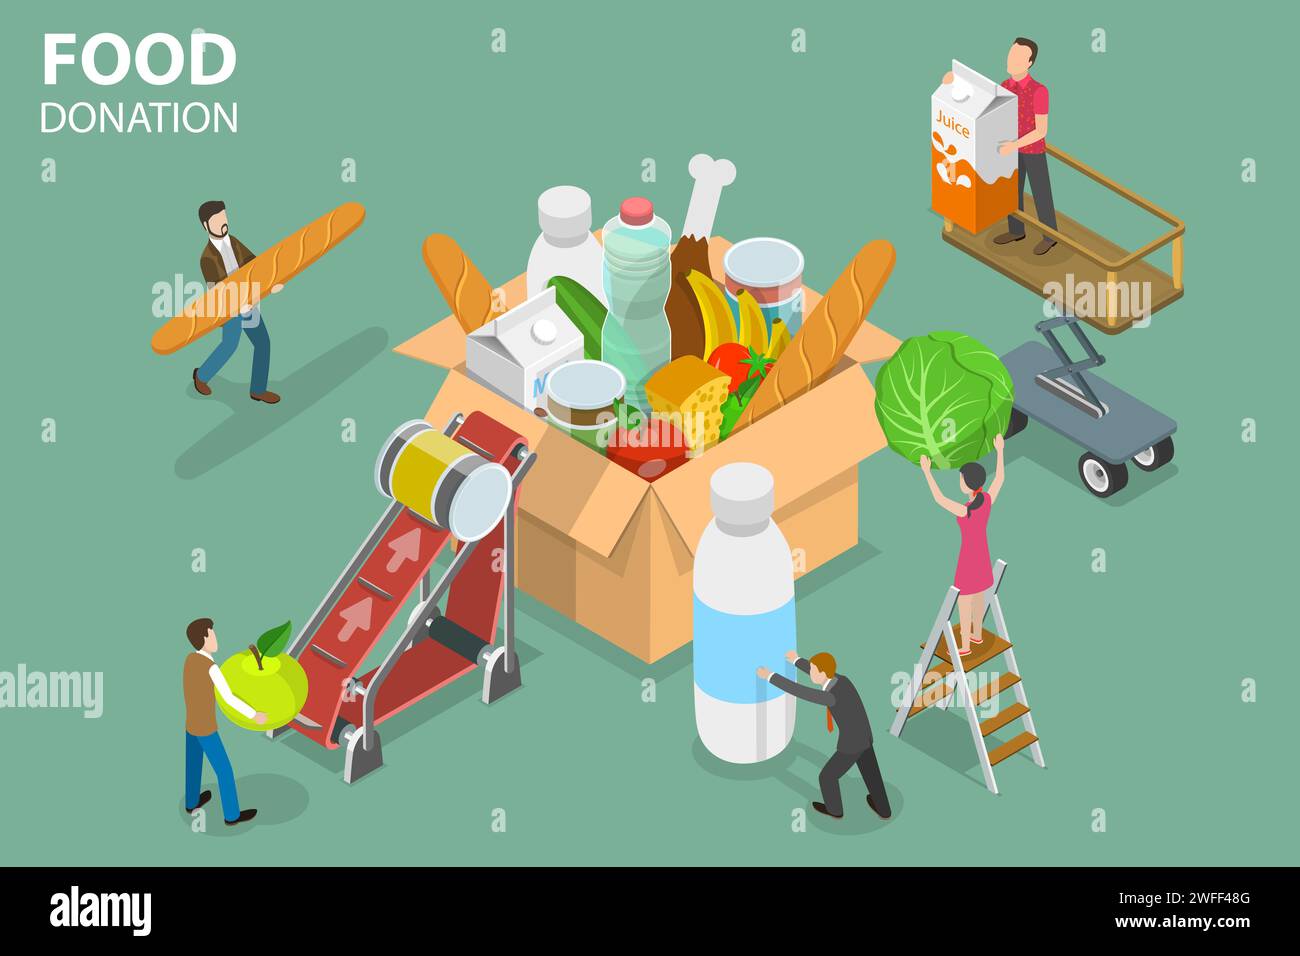 3D Isometric Flat Vector Conceptual Illustration of Food Donation, Poor People Support, Volunteering and Charity. Stock Vector